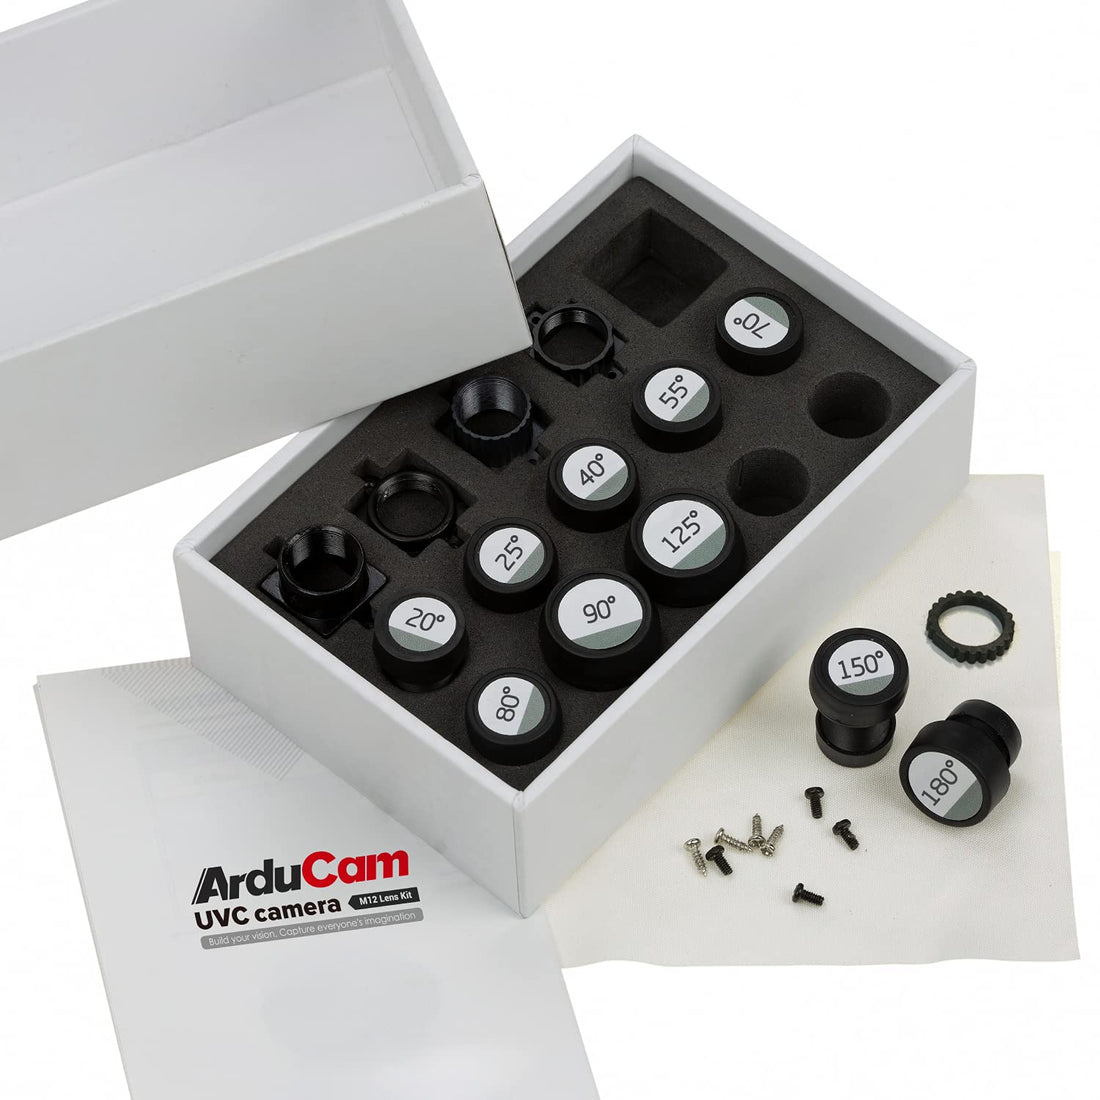 Arducam M12 Lens Set, Arducam Lens for USB Camera(1/2.7” 1/2.8″ 1/2.9″), Telephoto, Macro, Wide Angle, Fisheye Lens Kit (20°- 180°) with M12 Lens Holder and Cleaning Cloth, Optical All-in-One